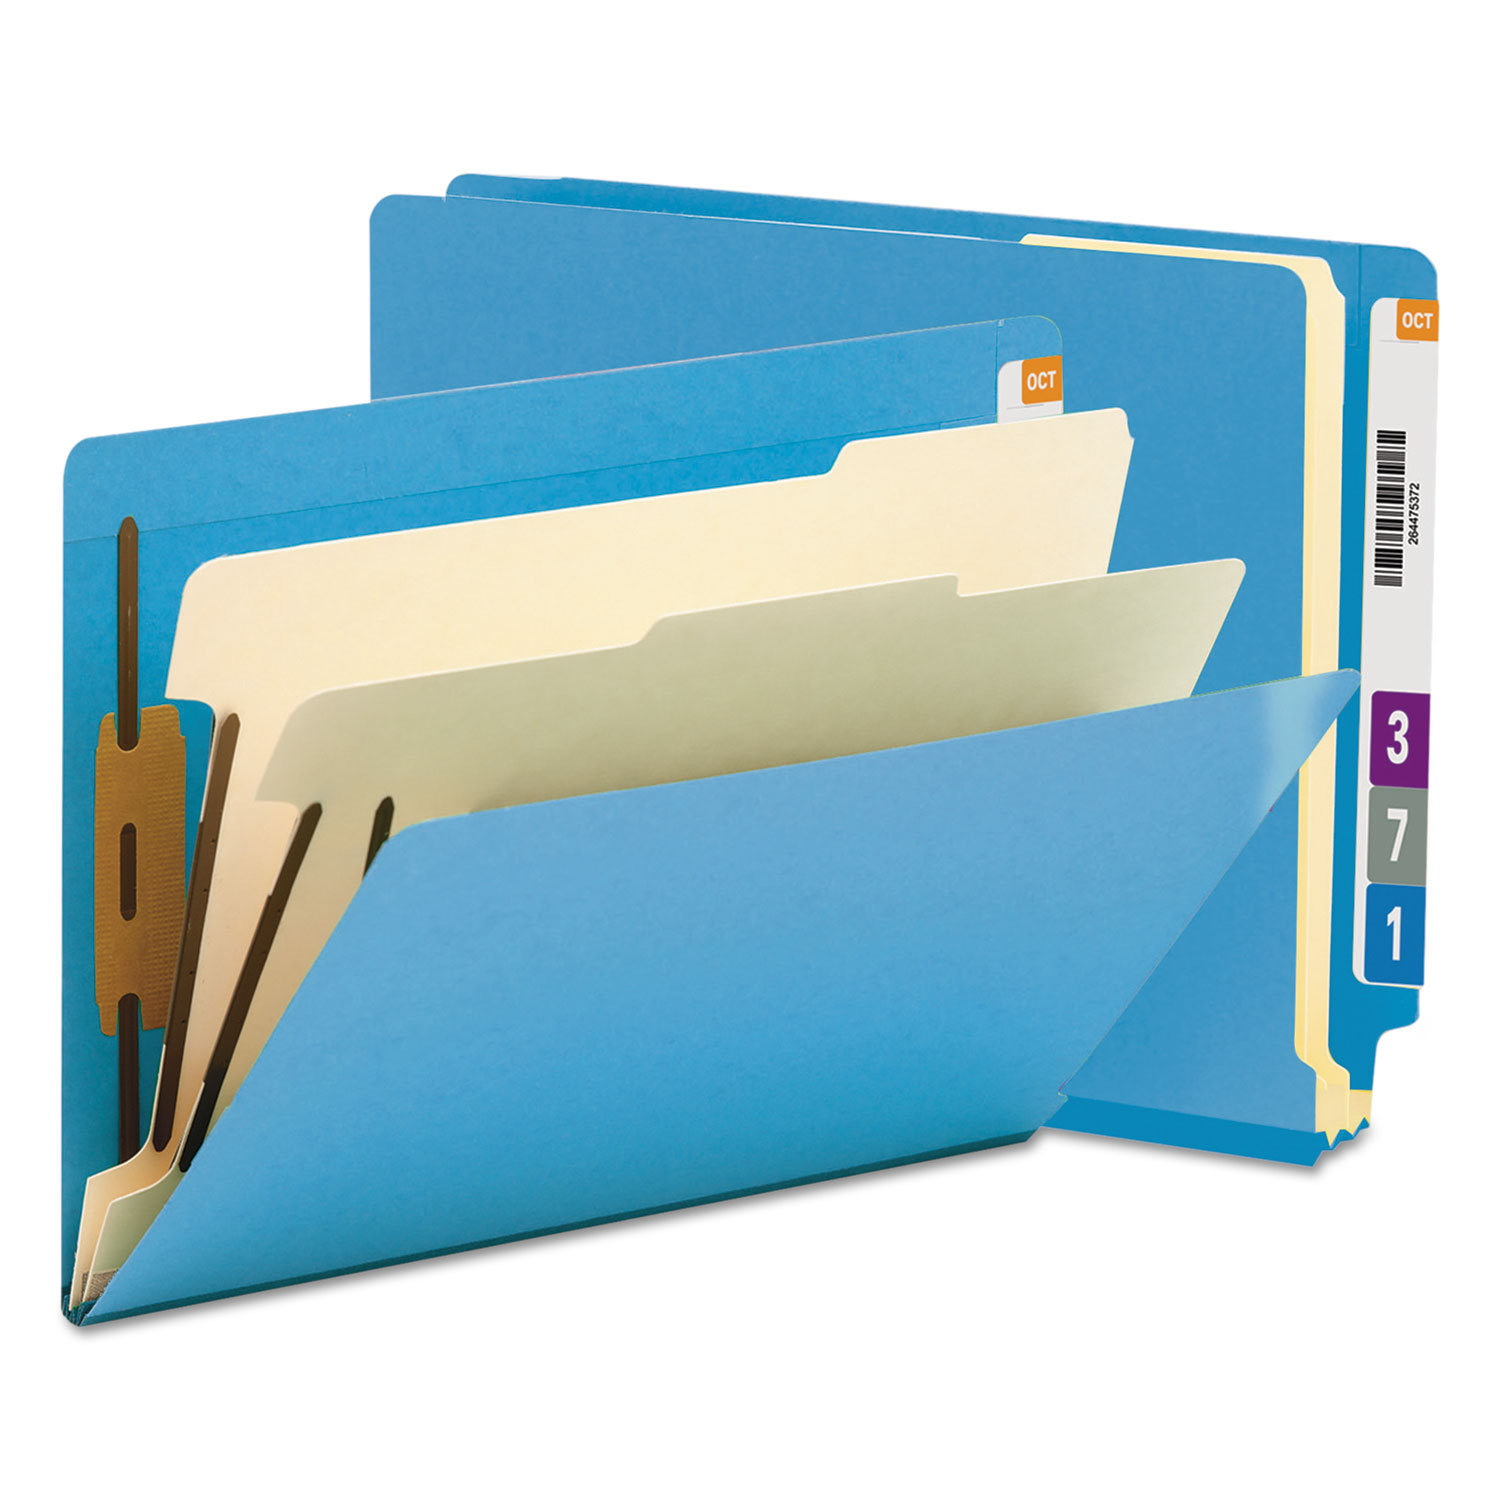  Smead 26836 Colored End Tab Classification Folders w/ Dividers, 2 Dividers, Letter Size, Blue, 10/Box (SMD26836) 